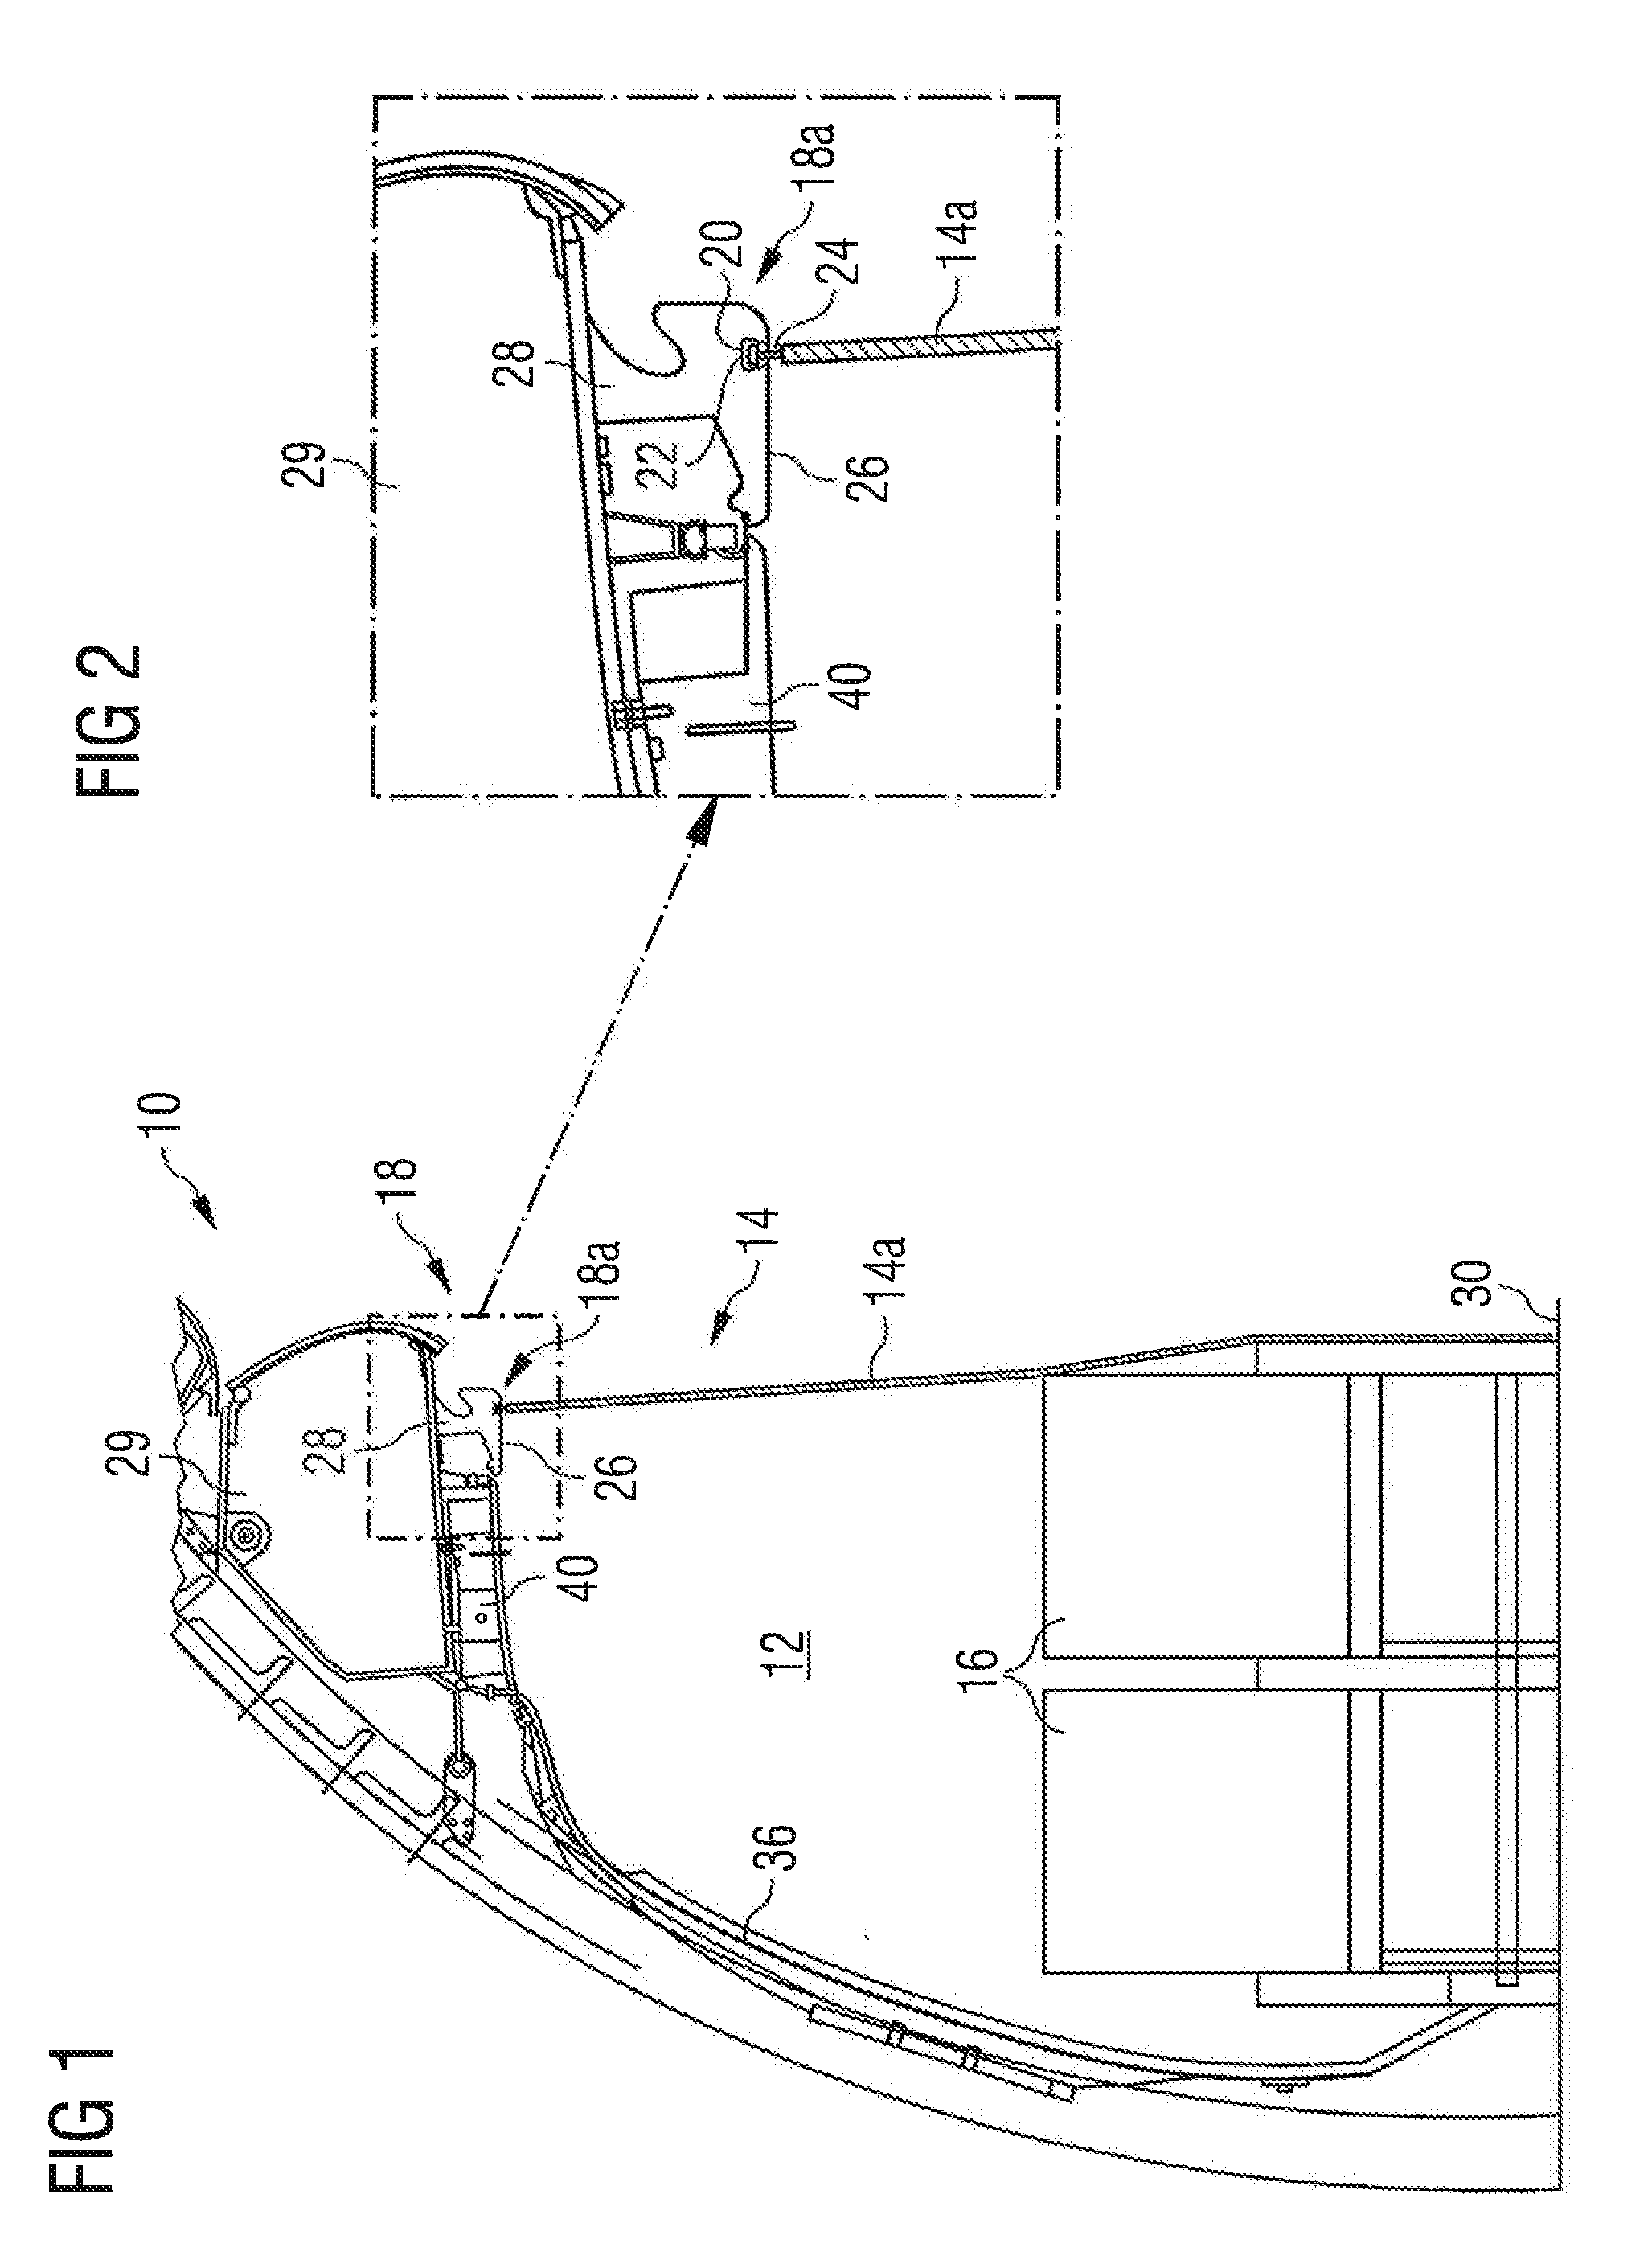 Device for delimiting a crew rest compartment and method for implementing such a device